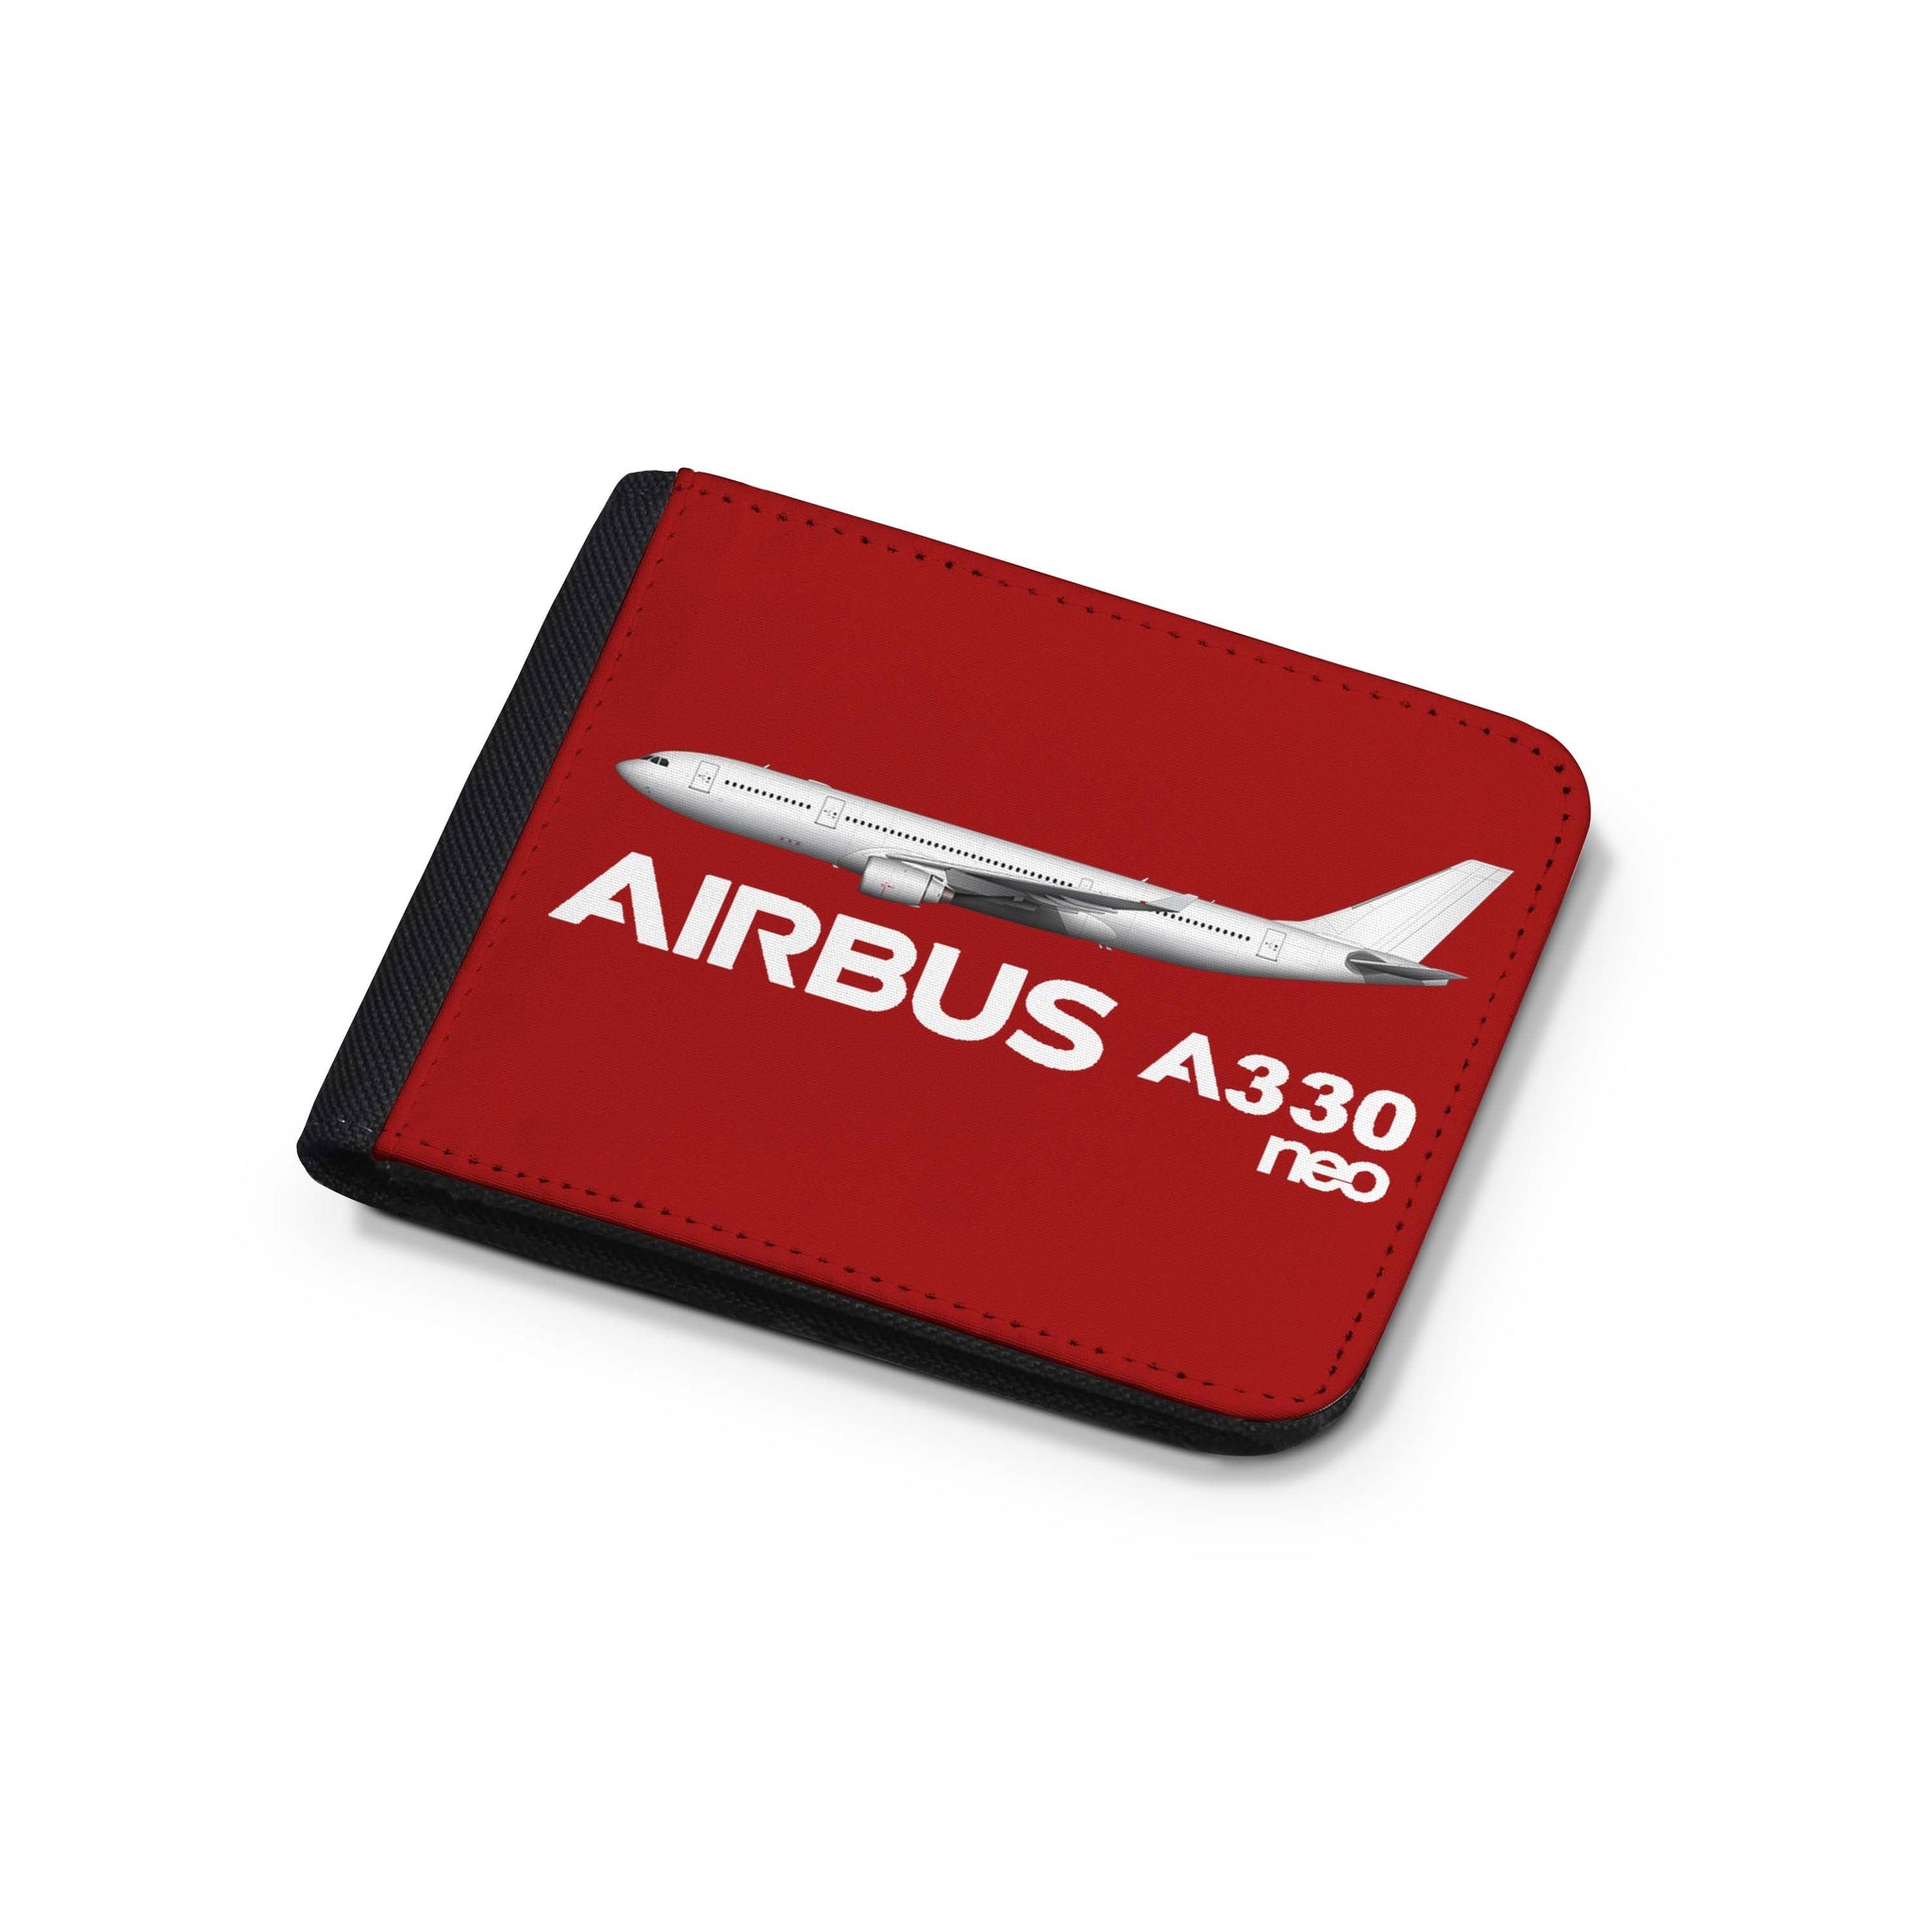 The Airbus A330neo Designed Wallets